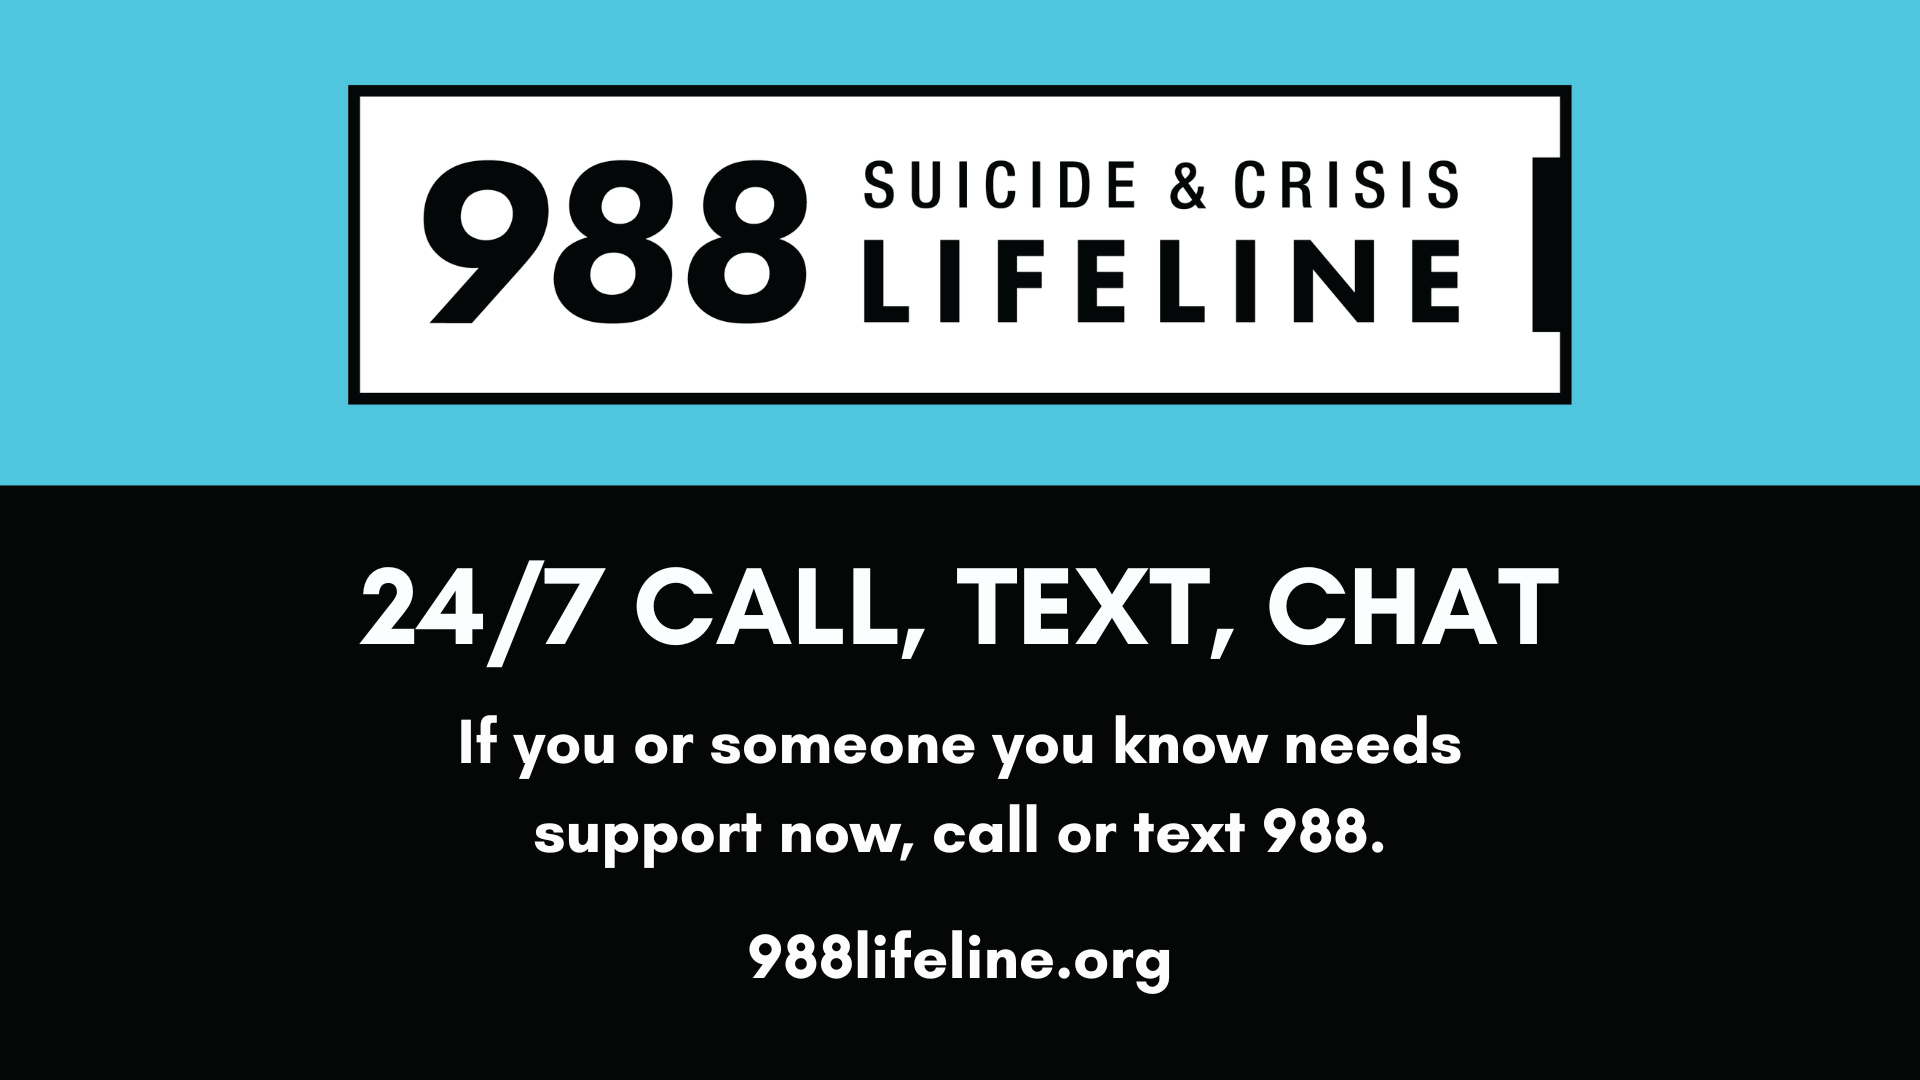 988 Suicide and Crisis Lifeline - Call, Text or Chat